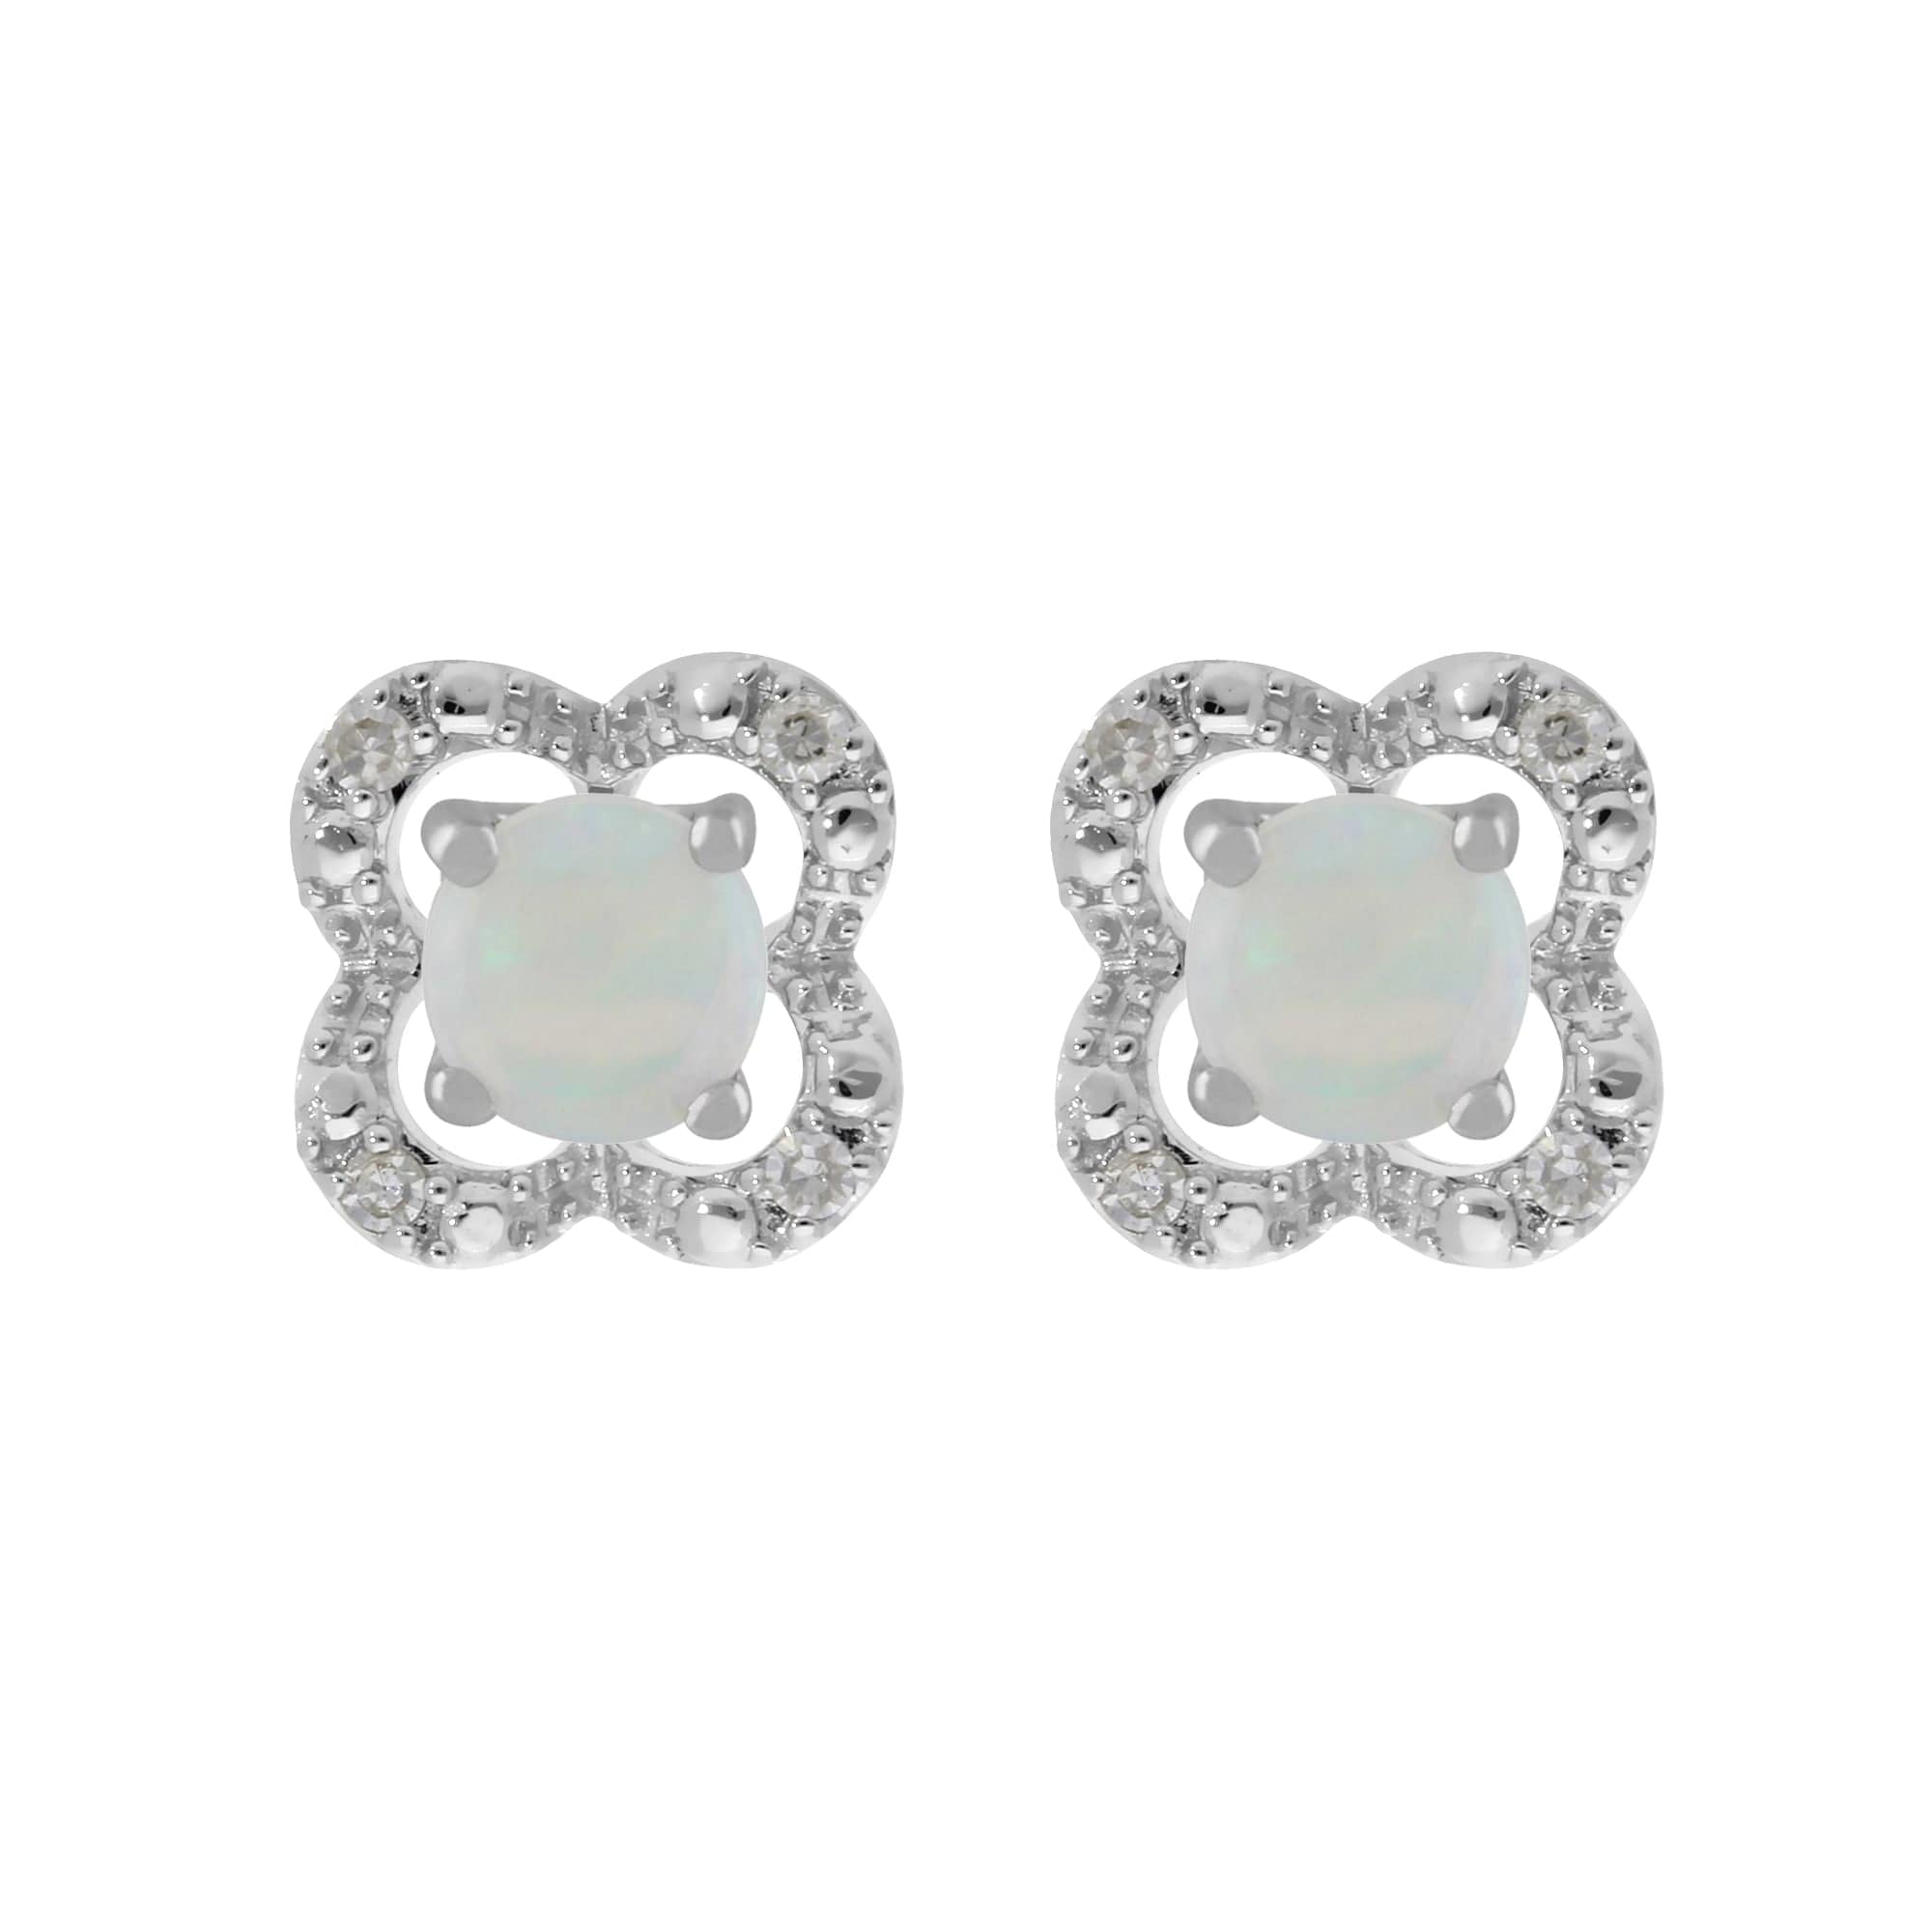 117E0031149-162E0244019 Classic Round Opal Studs with Detachable Diamond Flower Ear Jacket in 9ct White Gold 1